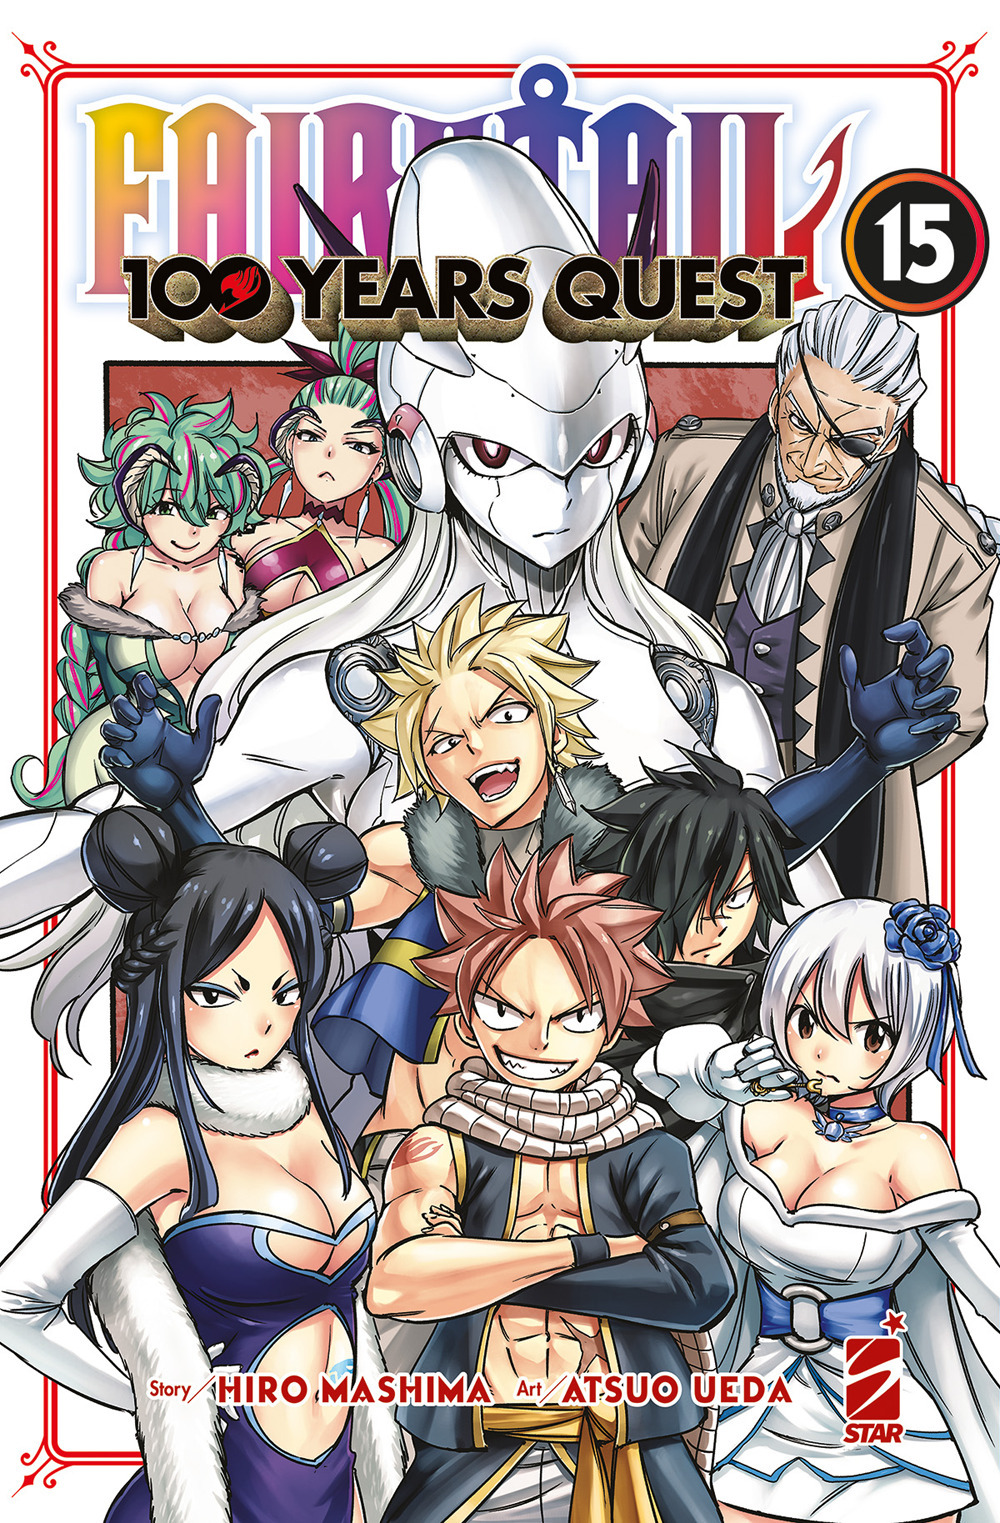 Fairy Tail. 100 years quest. Vol. 15